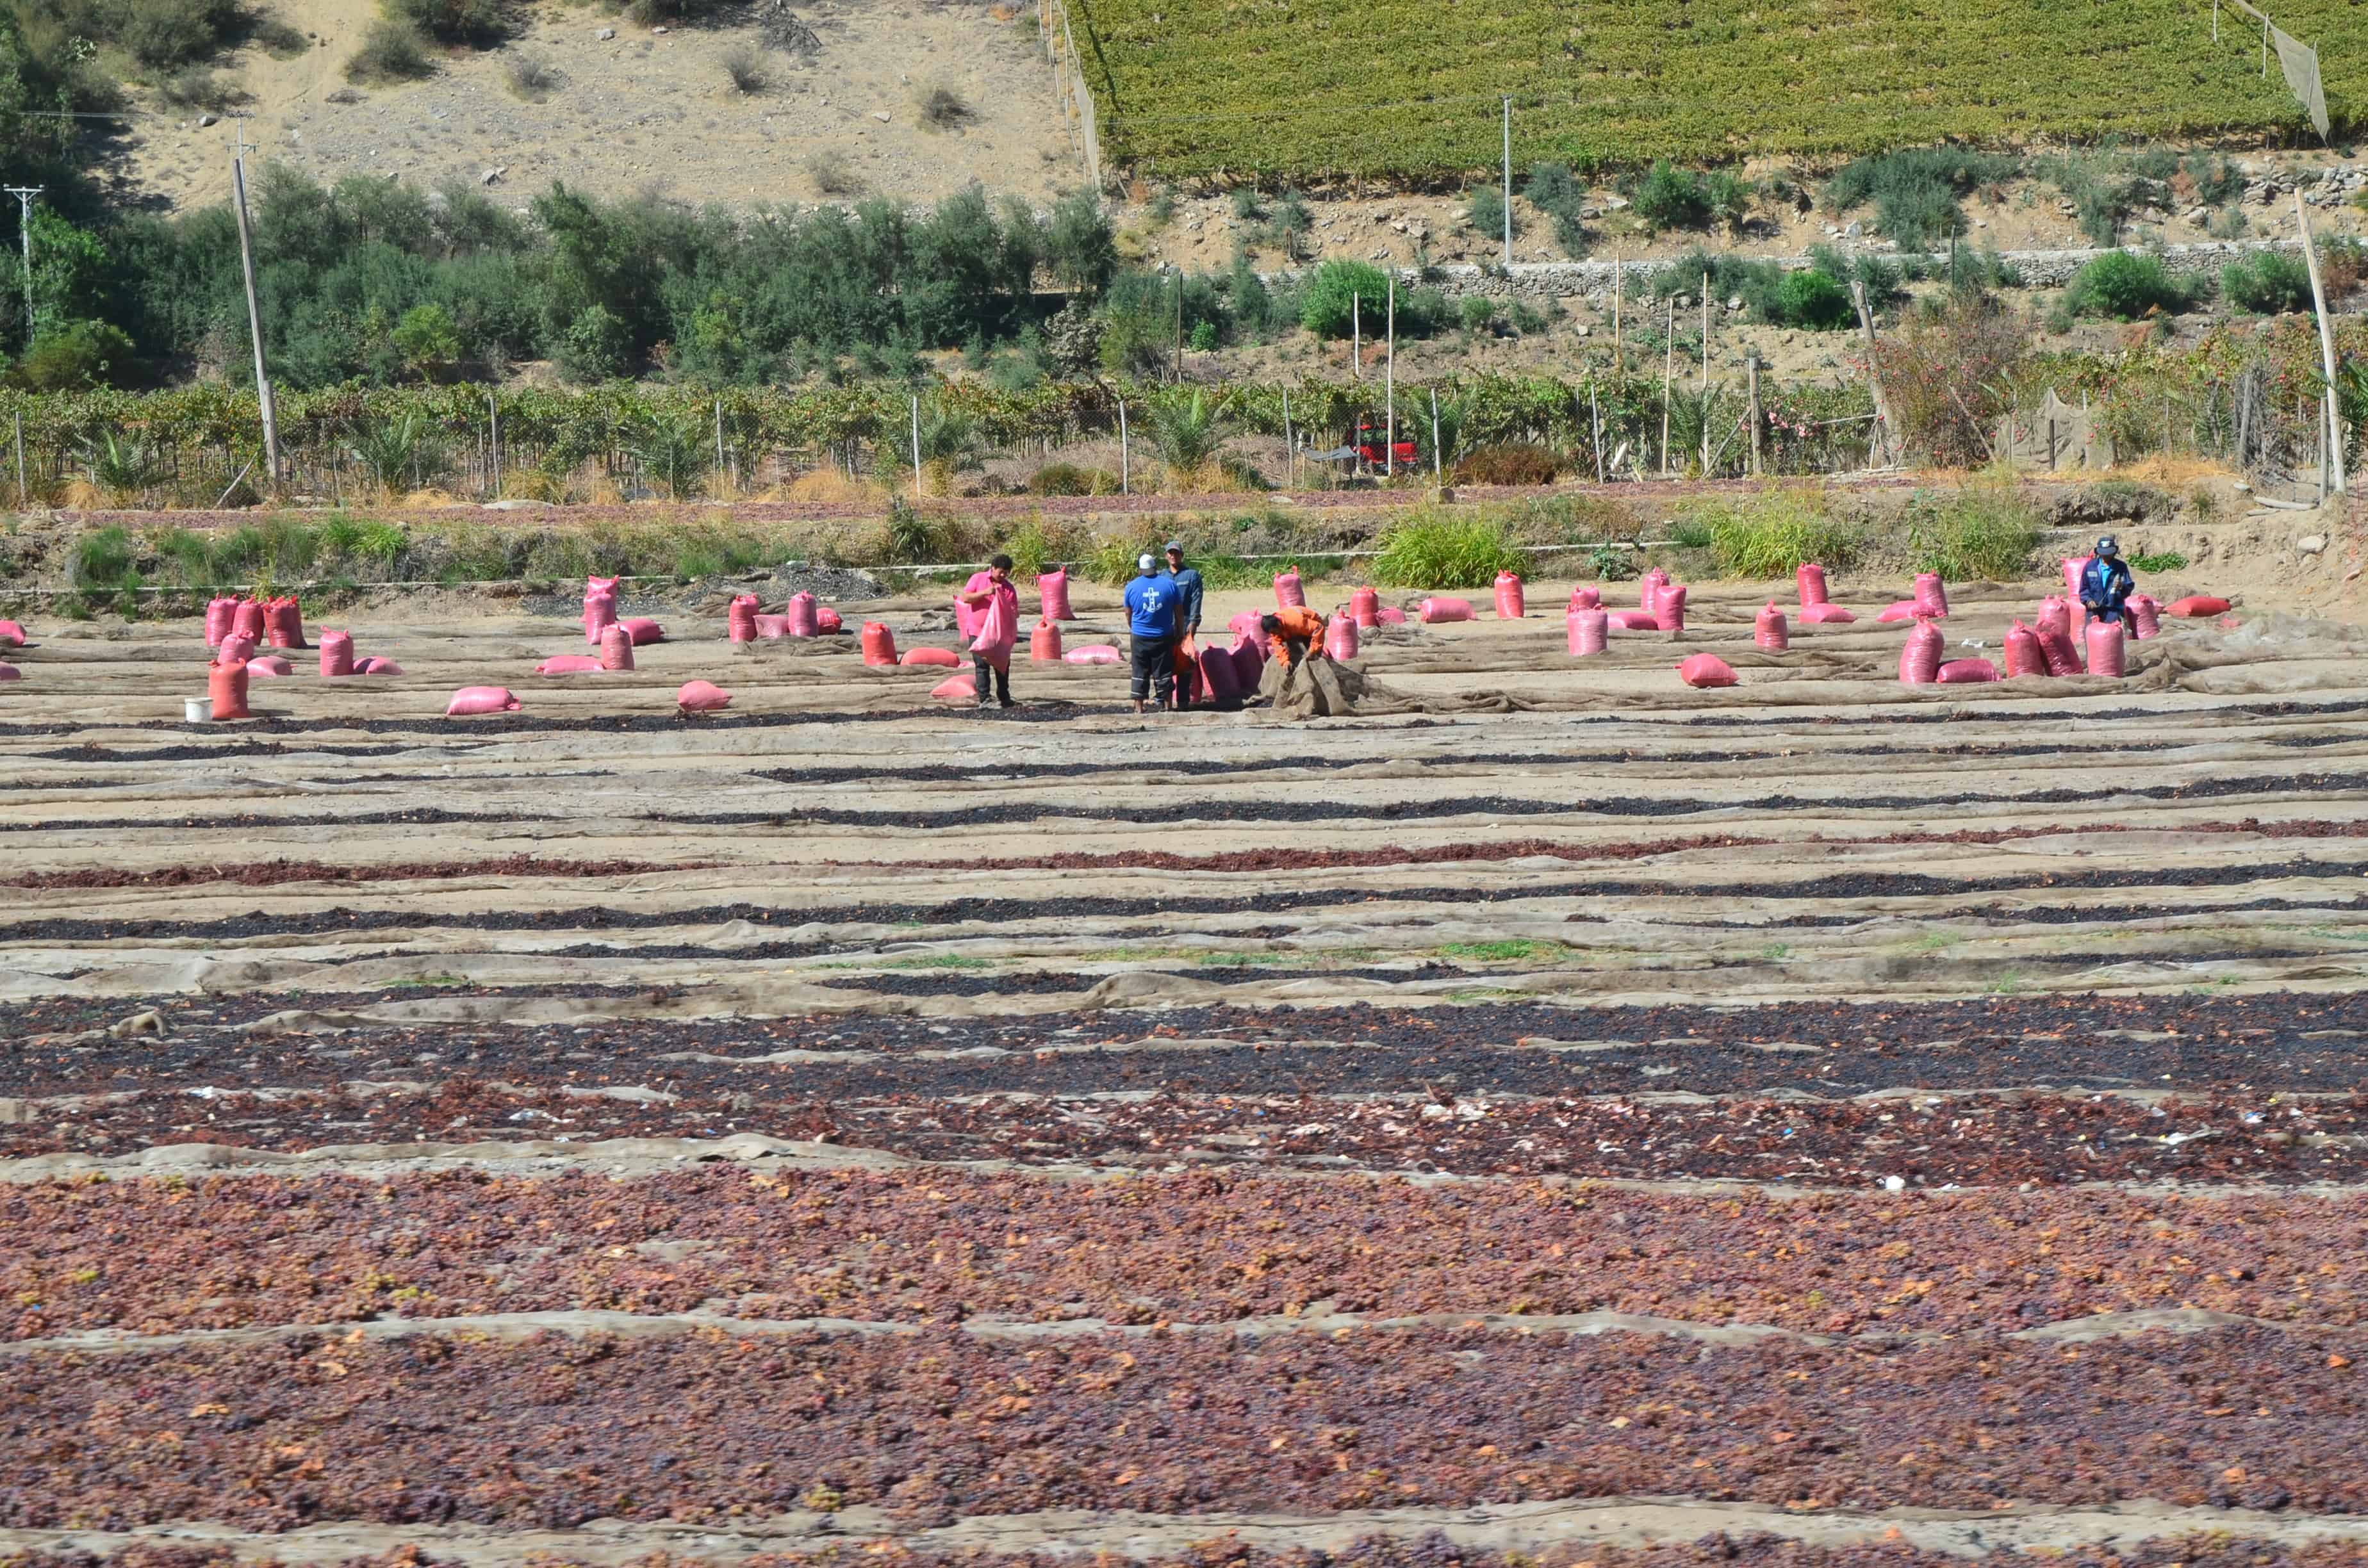 Grape harvest in Elqui Valley, Chile